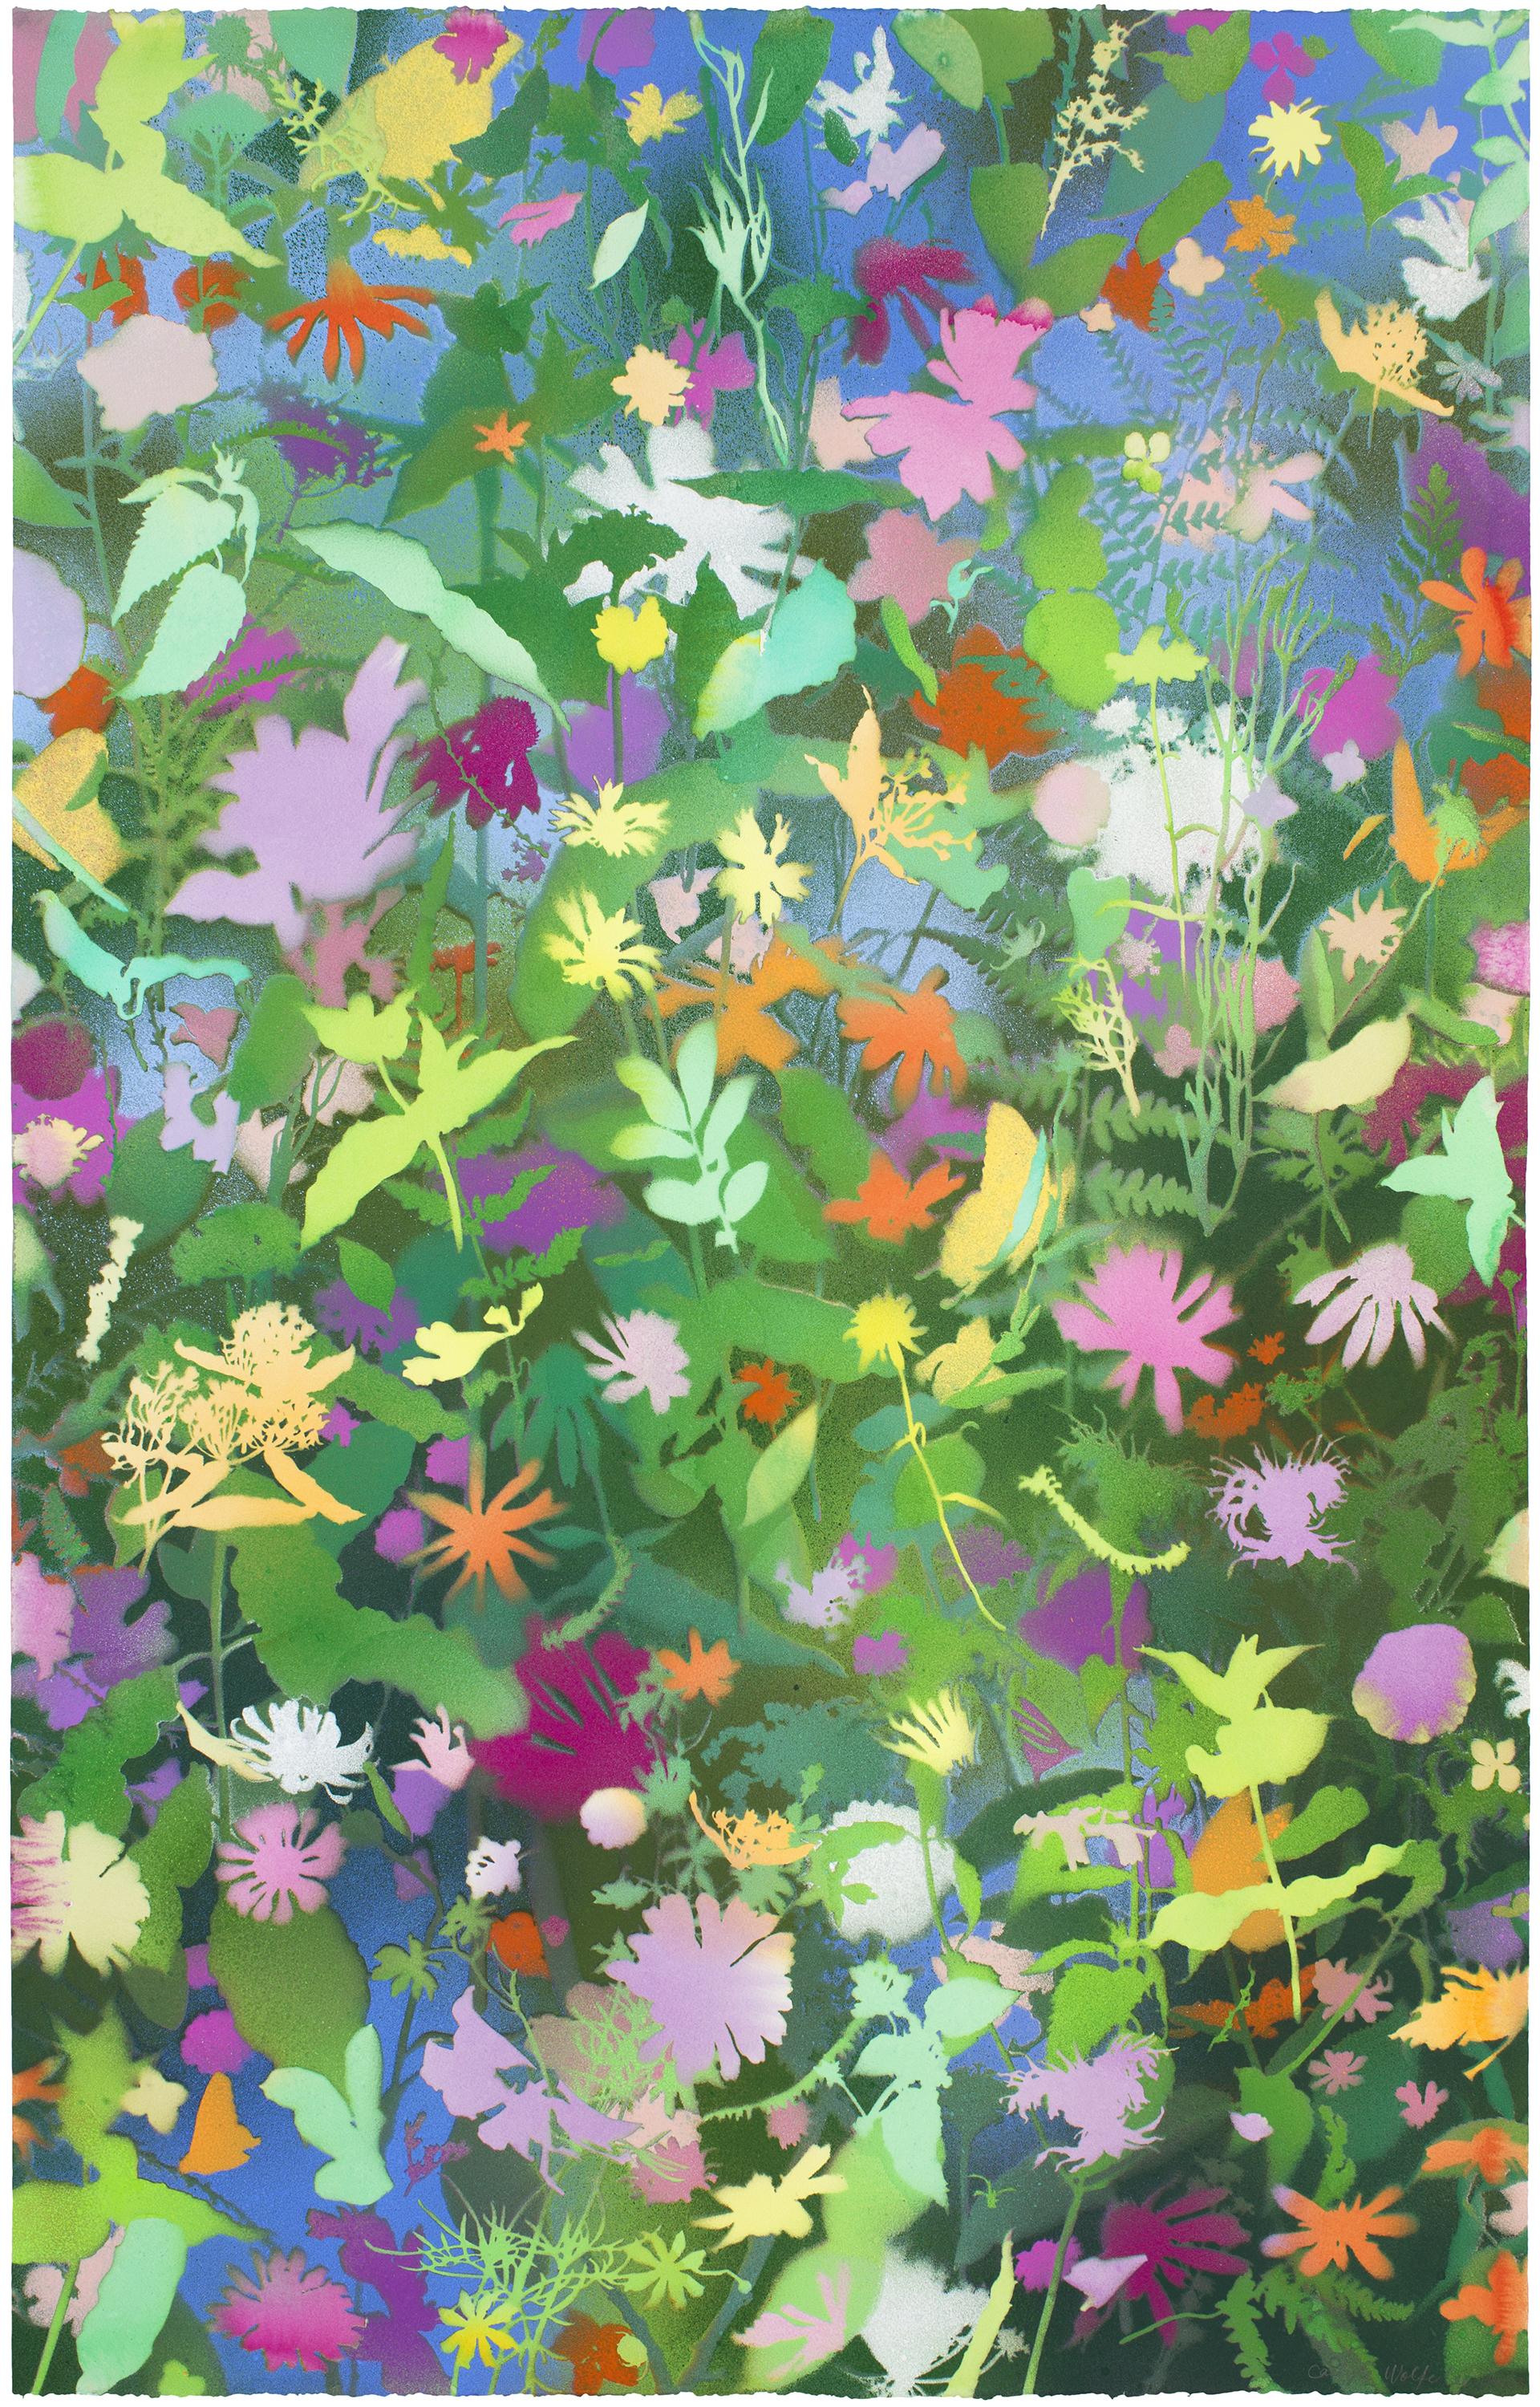 Carlyle Wolfe Lee Abstract Painting - 'August Wildflowers II' - naturalist landscape, colorful, botanical, layered